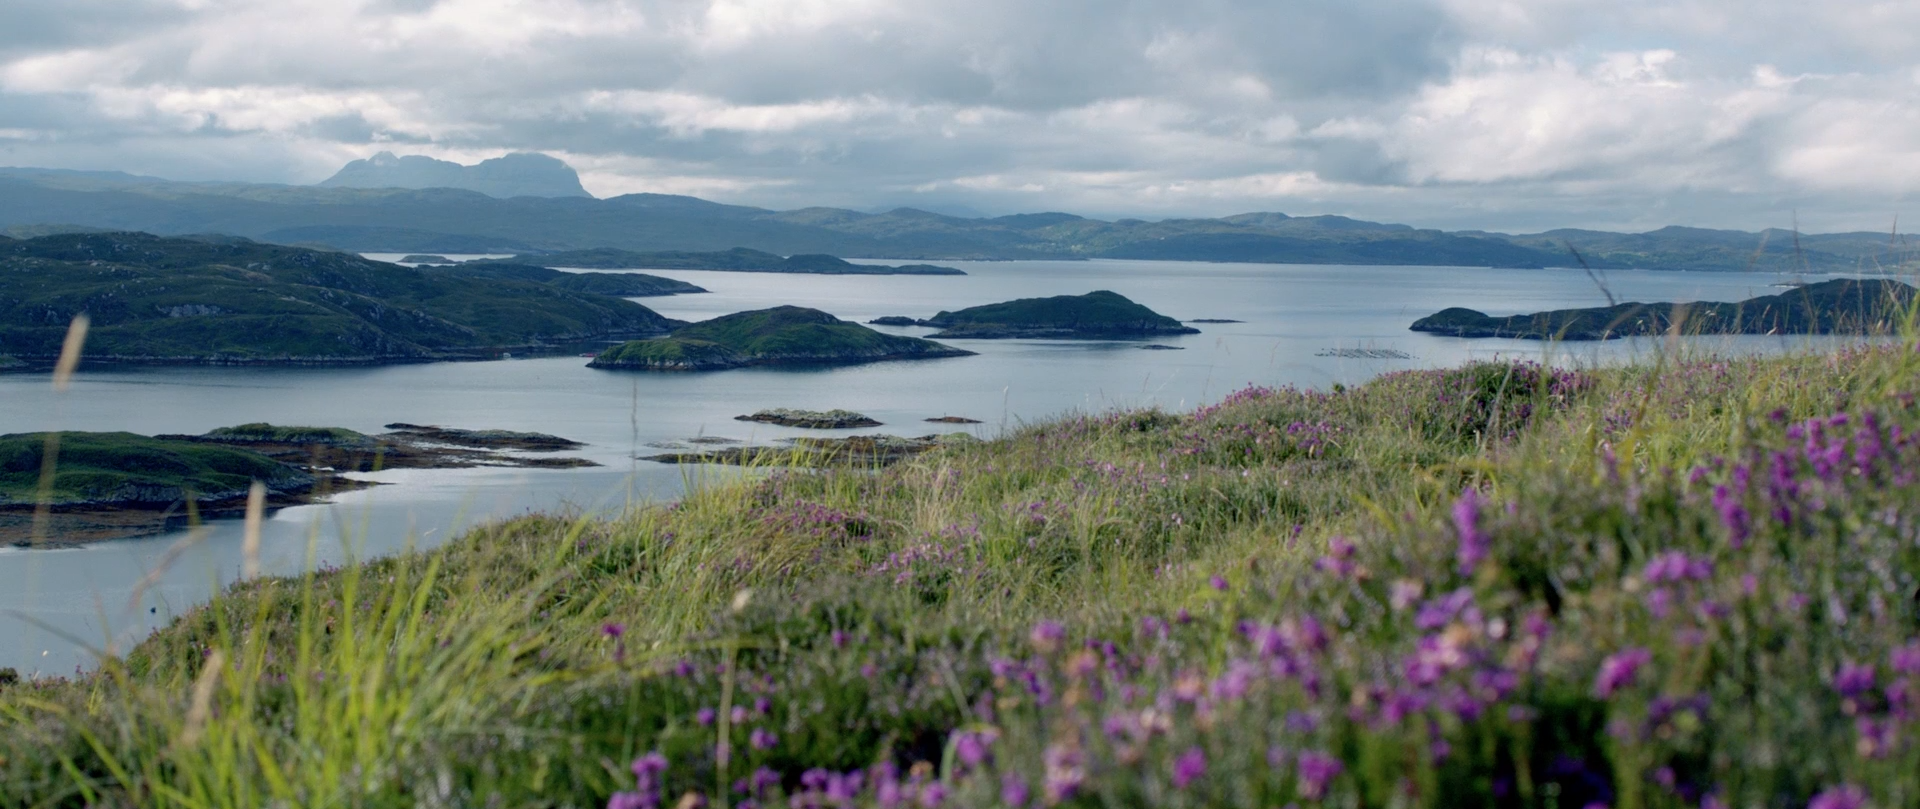 The Story, a video by Bruizer Video & Film Agency for Loch Duart